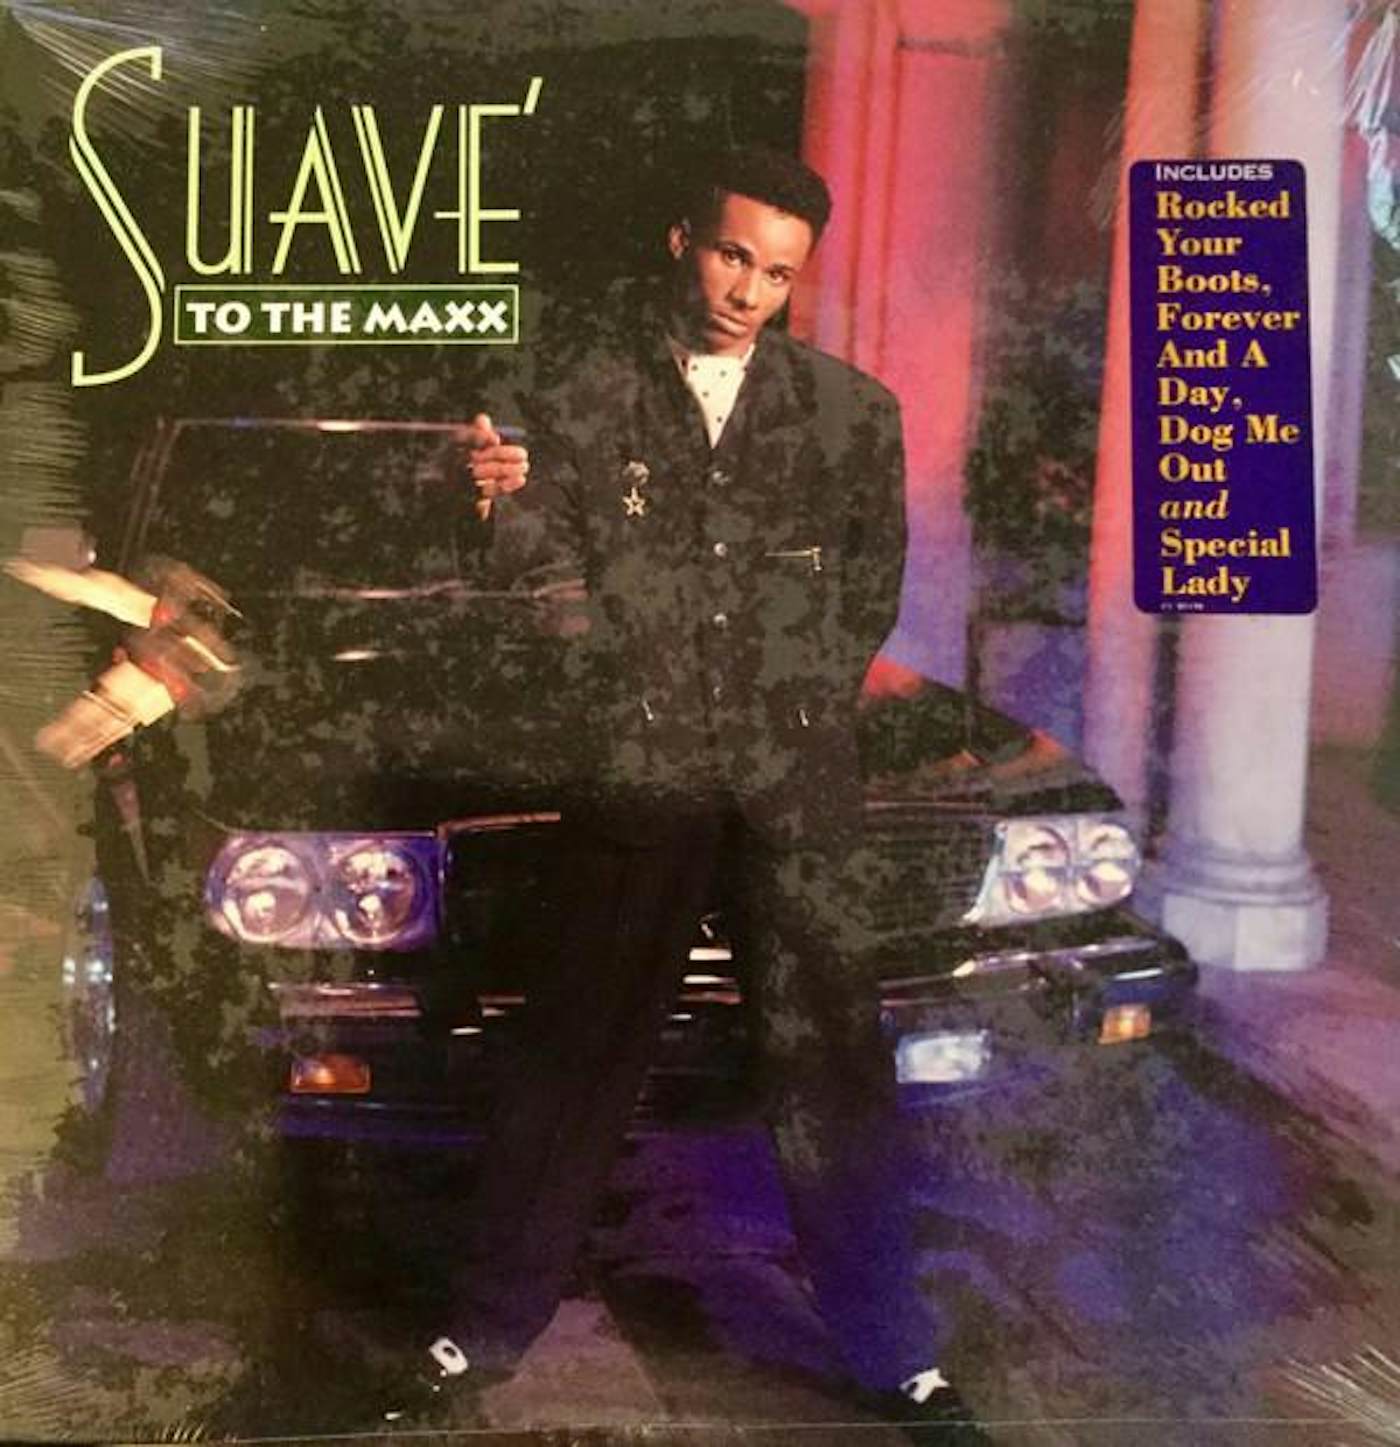 Suave TO THE MAXX CD